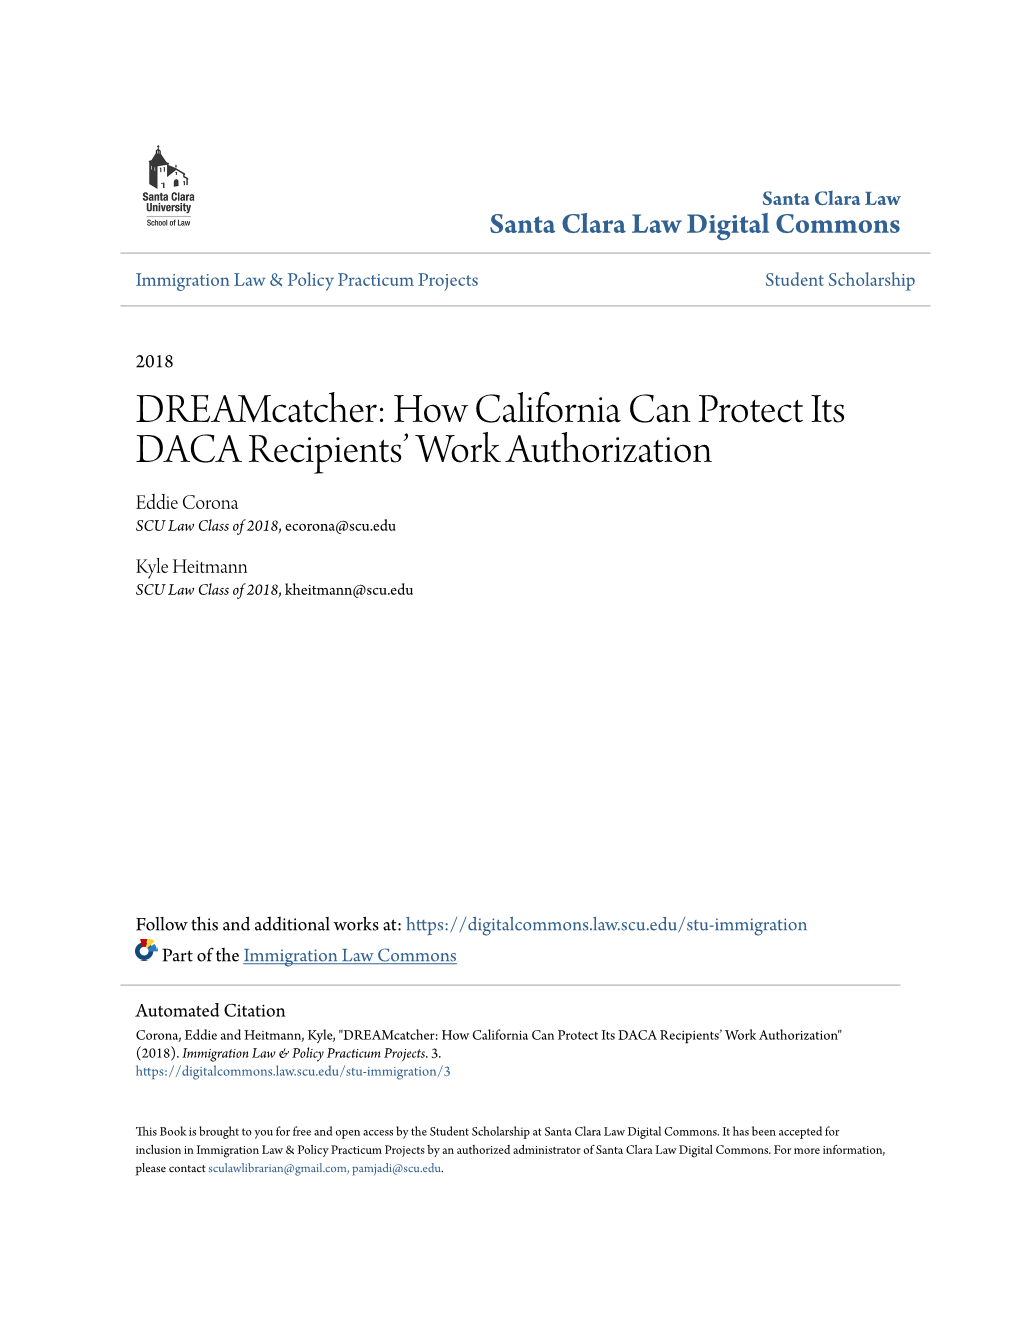 How California Can Protect Its DACA Recipients' Work Authorization